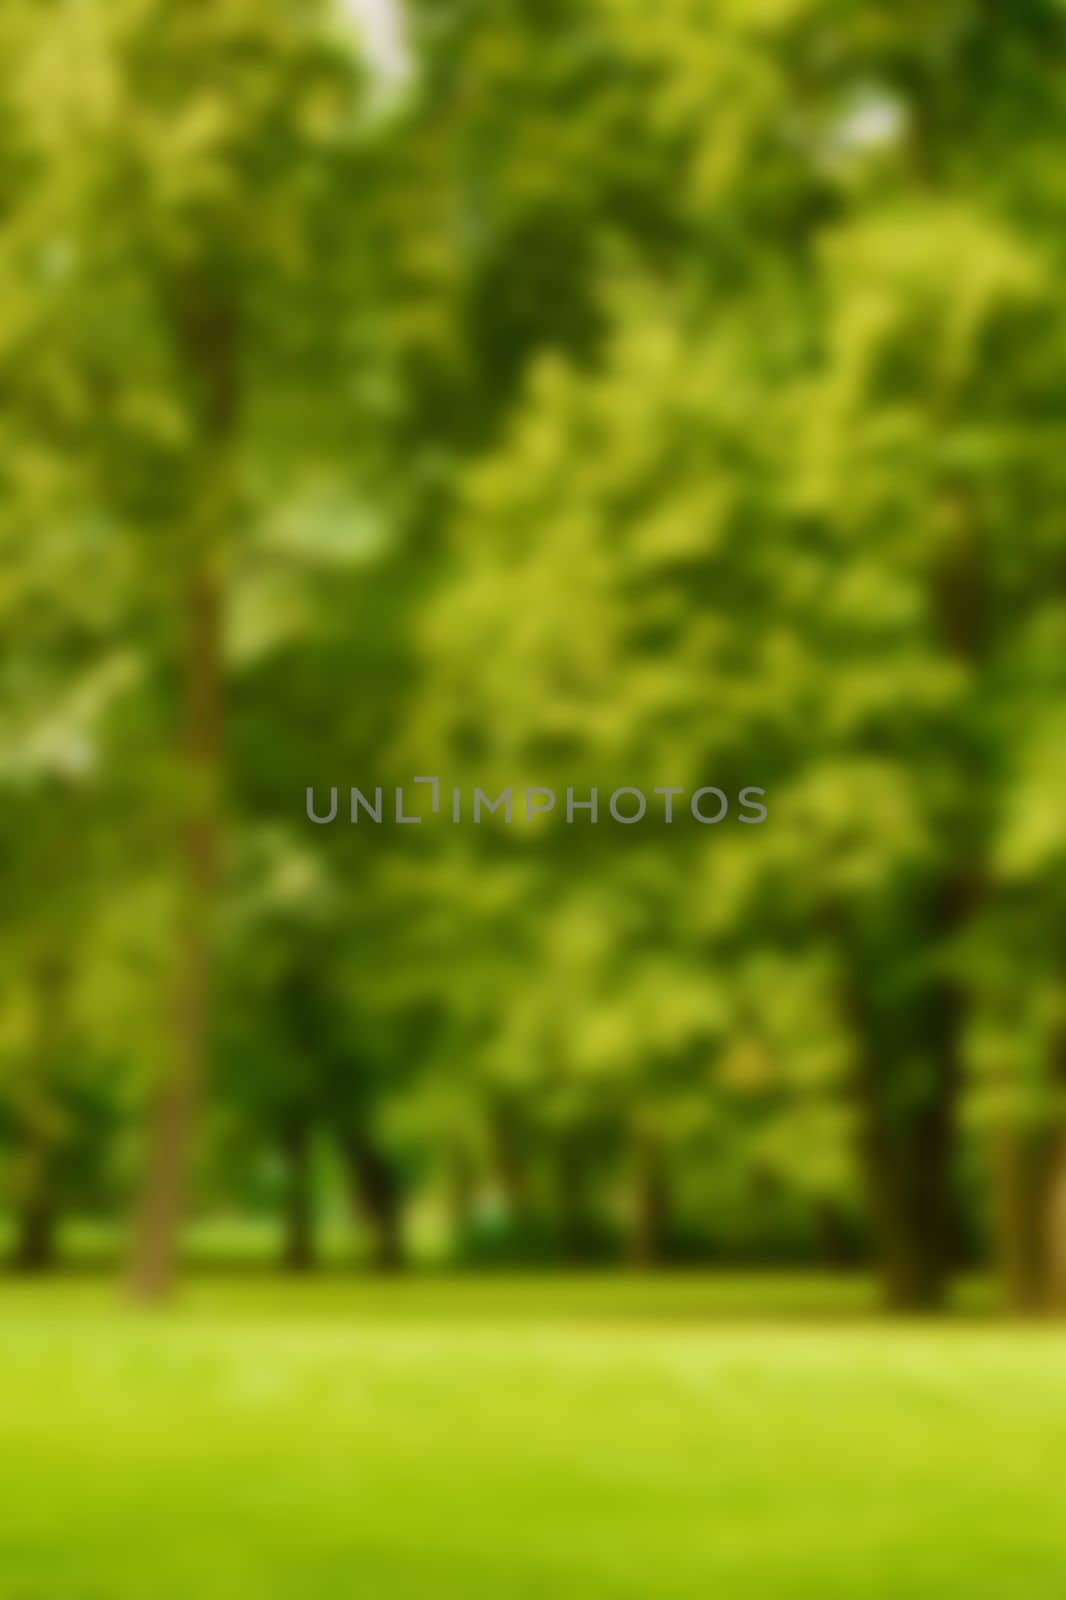 Blur natural and light background in the park. Bokeh light yellow green abstract backgrounds textures. by kizuneko